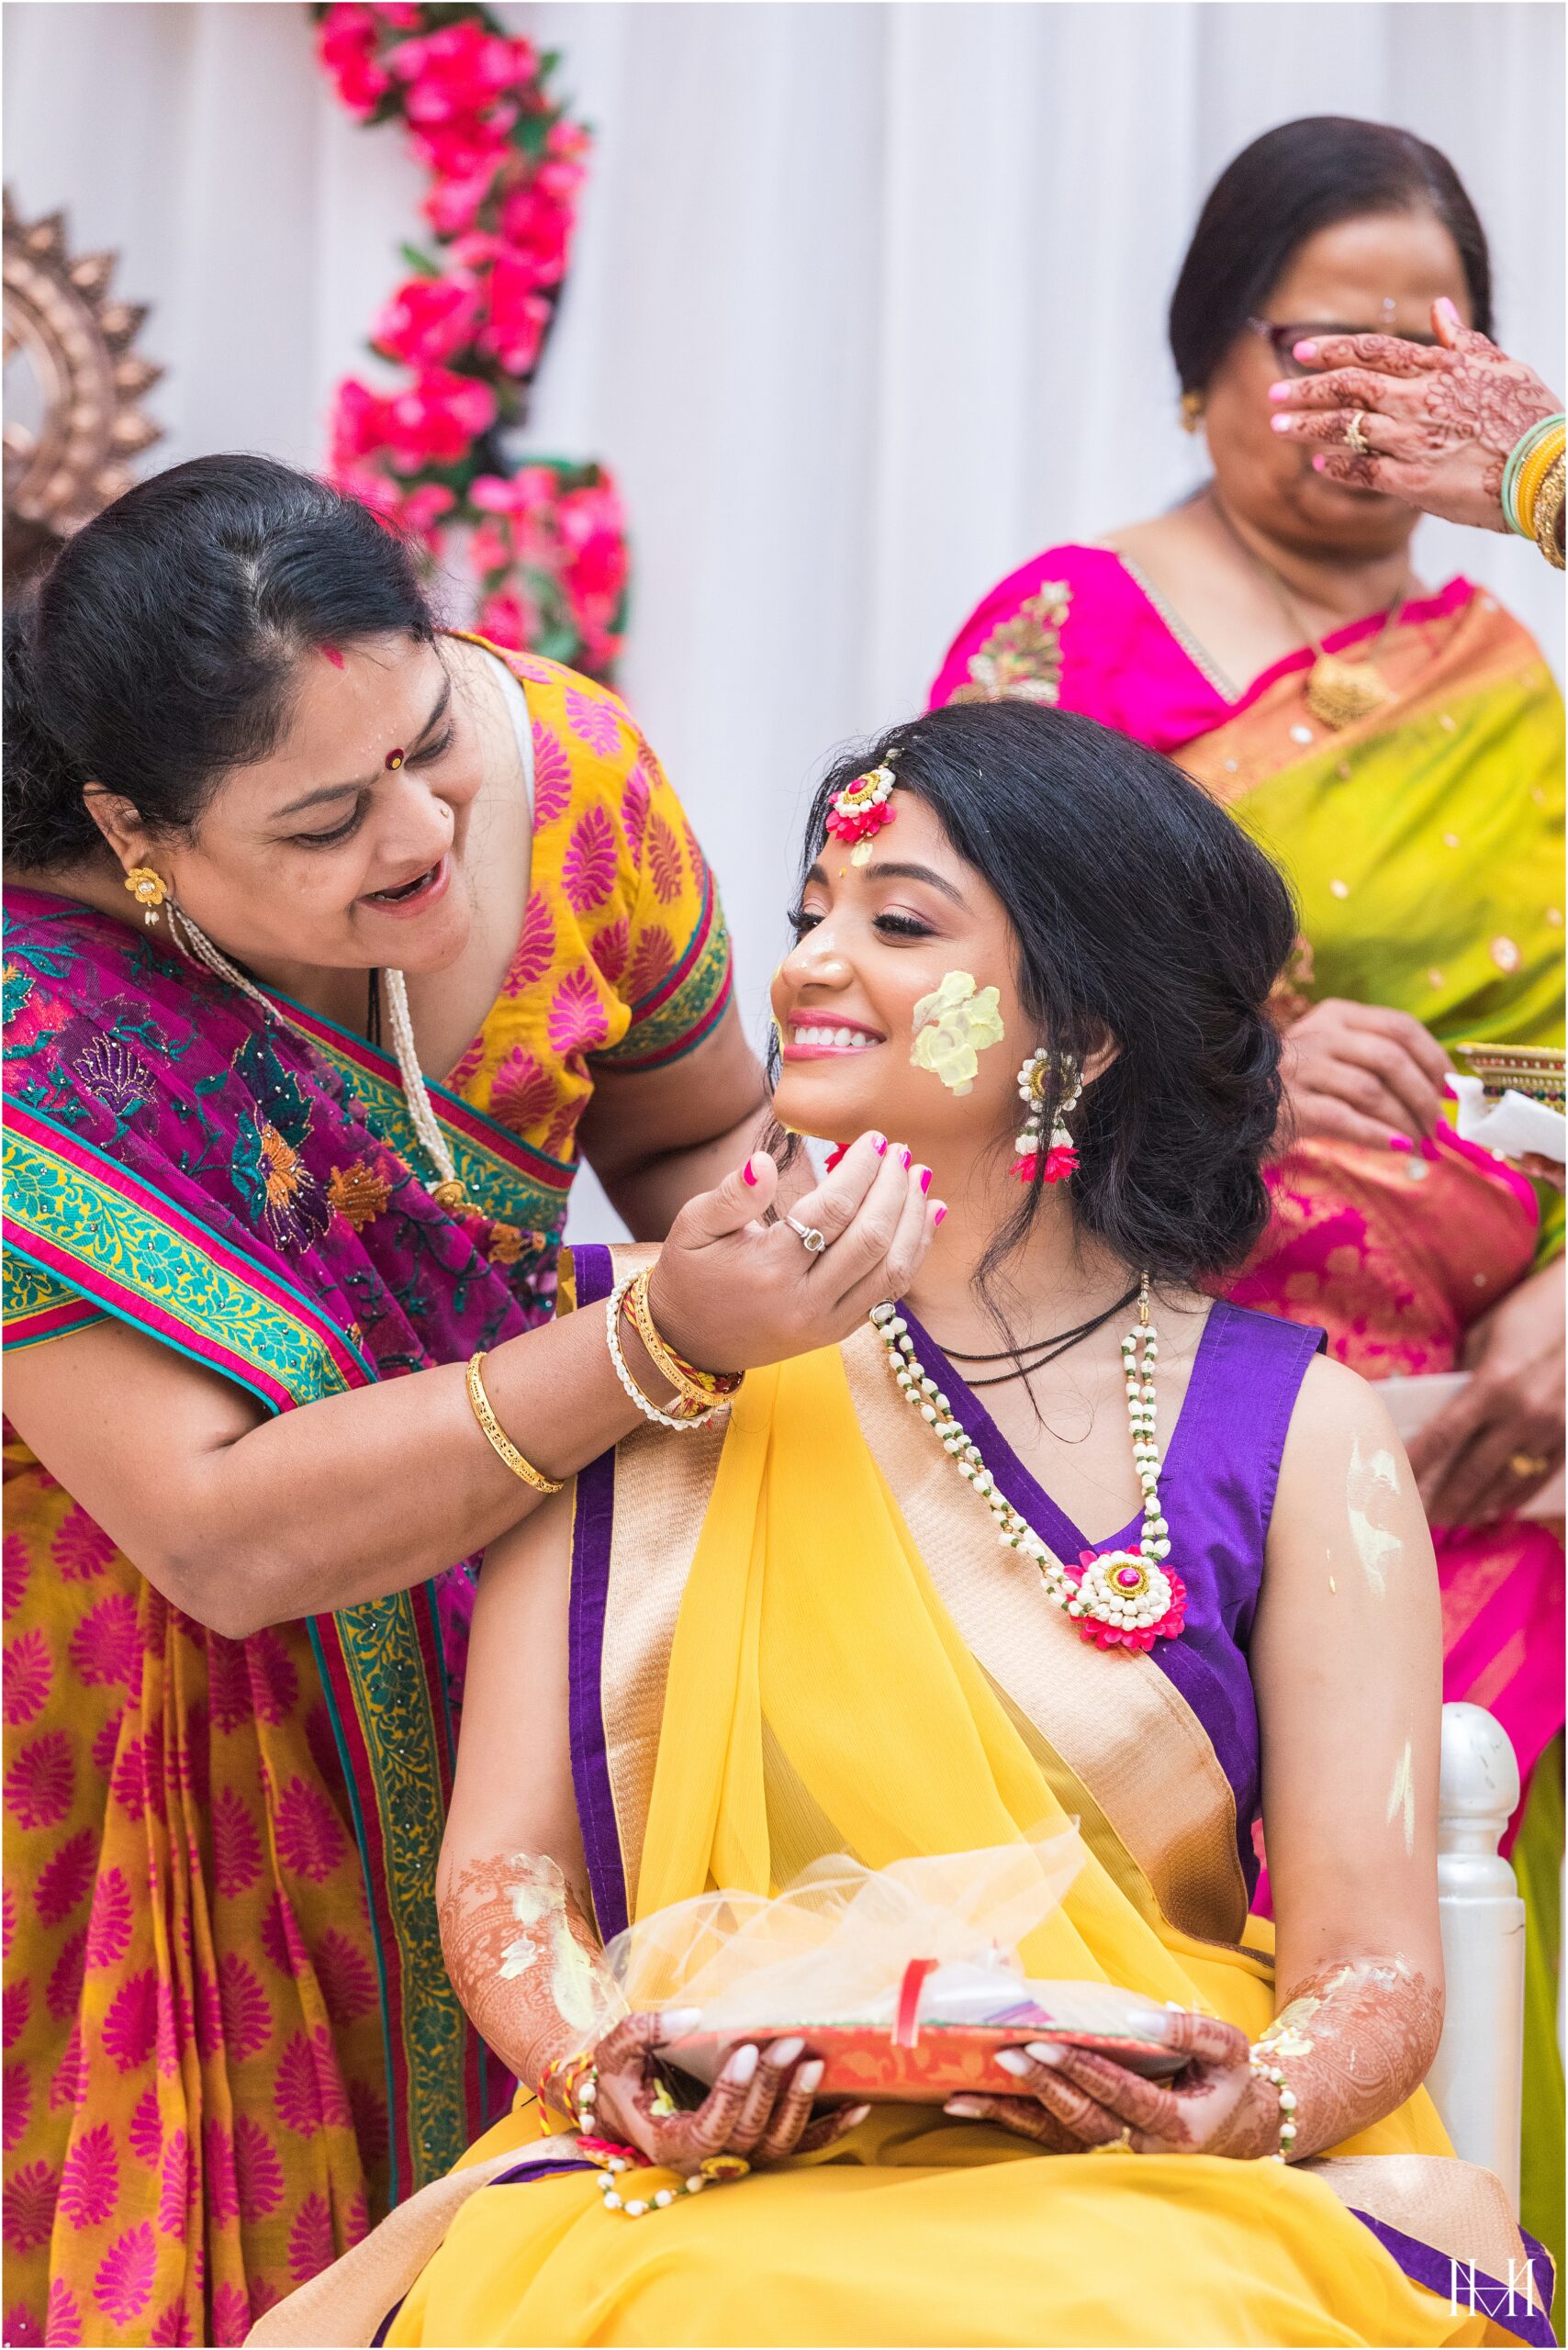 What is a haldi ceremony?